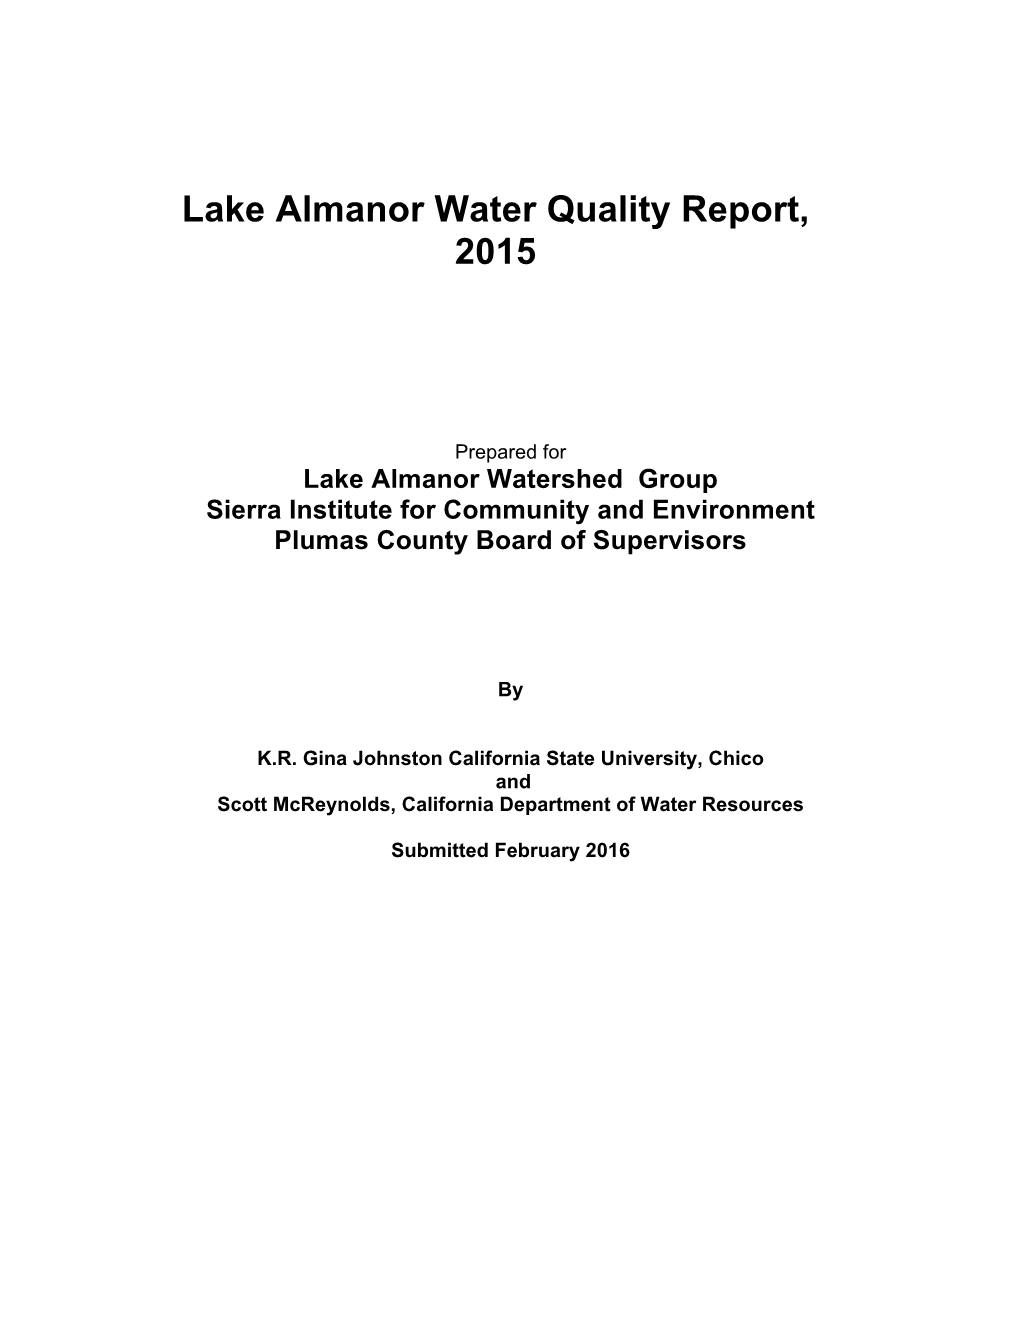 Lake Almanor Water Quality Report, 2015